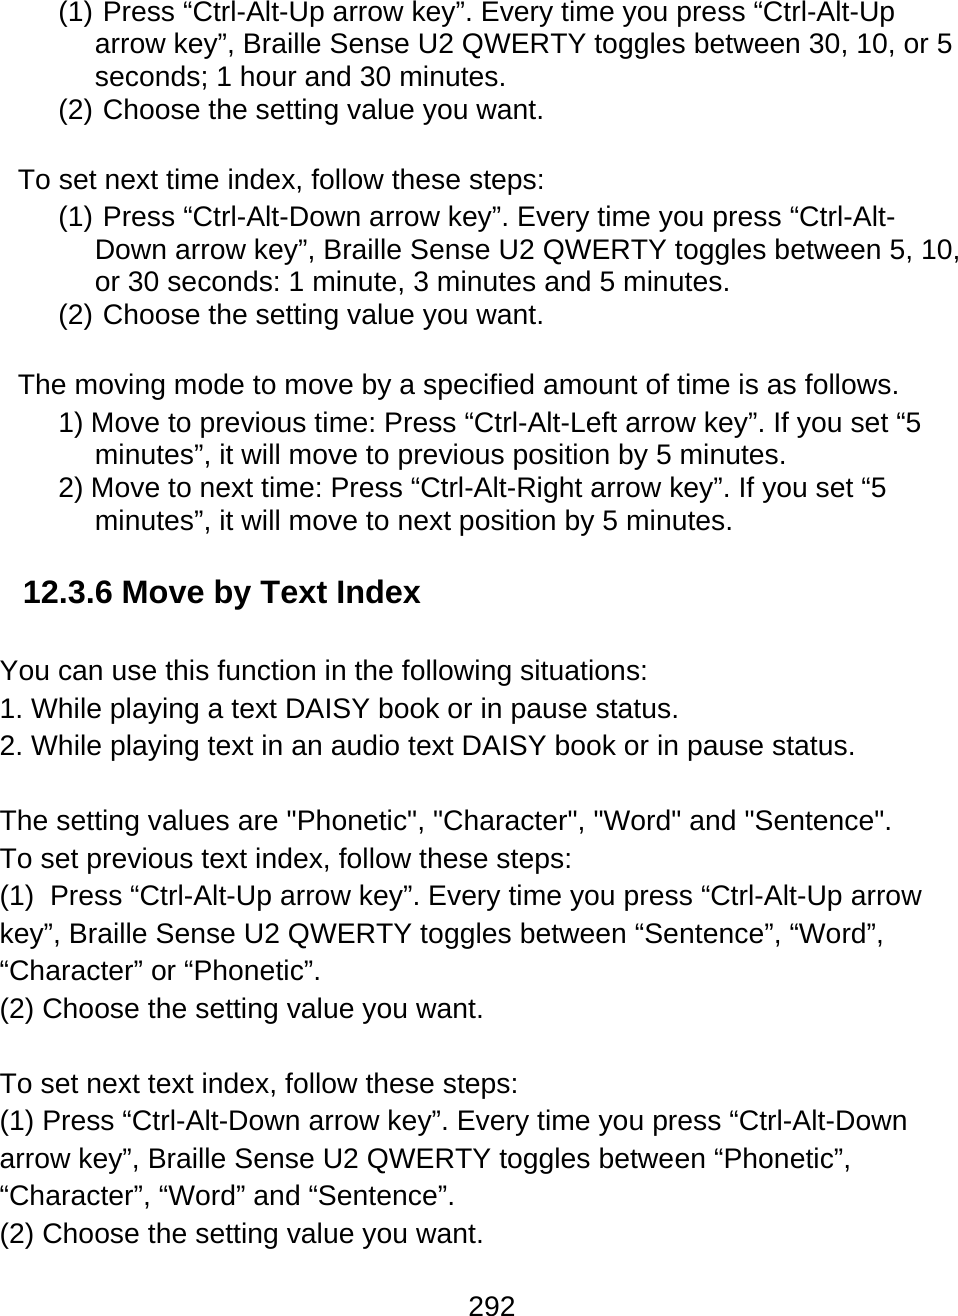 292  (1)   Press  “Ctrl-Alt-Up  arrow key”. Every time you press “Ctrl-Alt-Up arrow key”, Braille Sense U2 QWERTY toggles between 30, 10, or 5 seconds; 1 hour and 30 minutes. (2)  Choose the setting value you want.  To set next time index, follow these steps: (1)  Press “Ctrl-Alt-Down arrow key”. Every time you press “Ctrl-Alt-Down arrow key”, Braille Sense U2 QWERTY toggles between 5, 10, or 30 seconds: 1 minute, 3 minutes and 5 minutes. (2)  Choose the setting value you want.  The moving mode to move by a specified amount of time is as follows. 1) Move to previous time: Press “Ctrl-Alt-Left arrow key”. If you set “5 minutes”, it will move to previous position by 5 minutes. 2) Move to next time: Press “Ctrl-Alt-Right arrow key”. If you set “5 minutes”, it will move to next position by 5 minutes.  12.3.6 Move by Text Index  You can use this function in the following situations: 1. While playing a text DAISY book or in pause status. 2. While playing text in an audio text DAISY book or in pause status.  The setting values are &quot;Phonetic&quot;, &quot;Character&quot;, &quot;Word&quot; and &quot;Sentence&quot;. To set previous text index, follow these steps: (1)  Press “Ctrl-Alt-Up arrow key”. Every time you press “Ctrl-Alt-Up arrow key”, Braille Sense U2 QWERTY toggles between “Sentence”, “Word”, “Character” or “Phonetic”. (2) Choose the setting value you want.  To set next text index, follow these steps: (1) Press “Ctrl-Alt-Down arrow key”. Every time you press “Ctrl-Alt-Down arrow key”, Braille Sense U2 QWERTY toggles between “Phonetic”, “Character”, “Word” and “Sentence”. (2) Choose the setting value you want. 